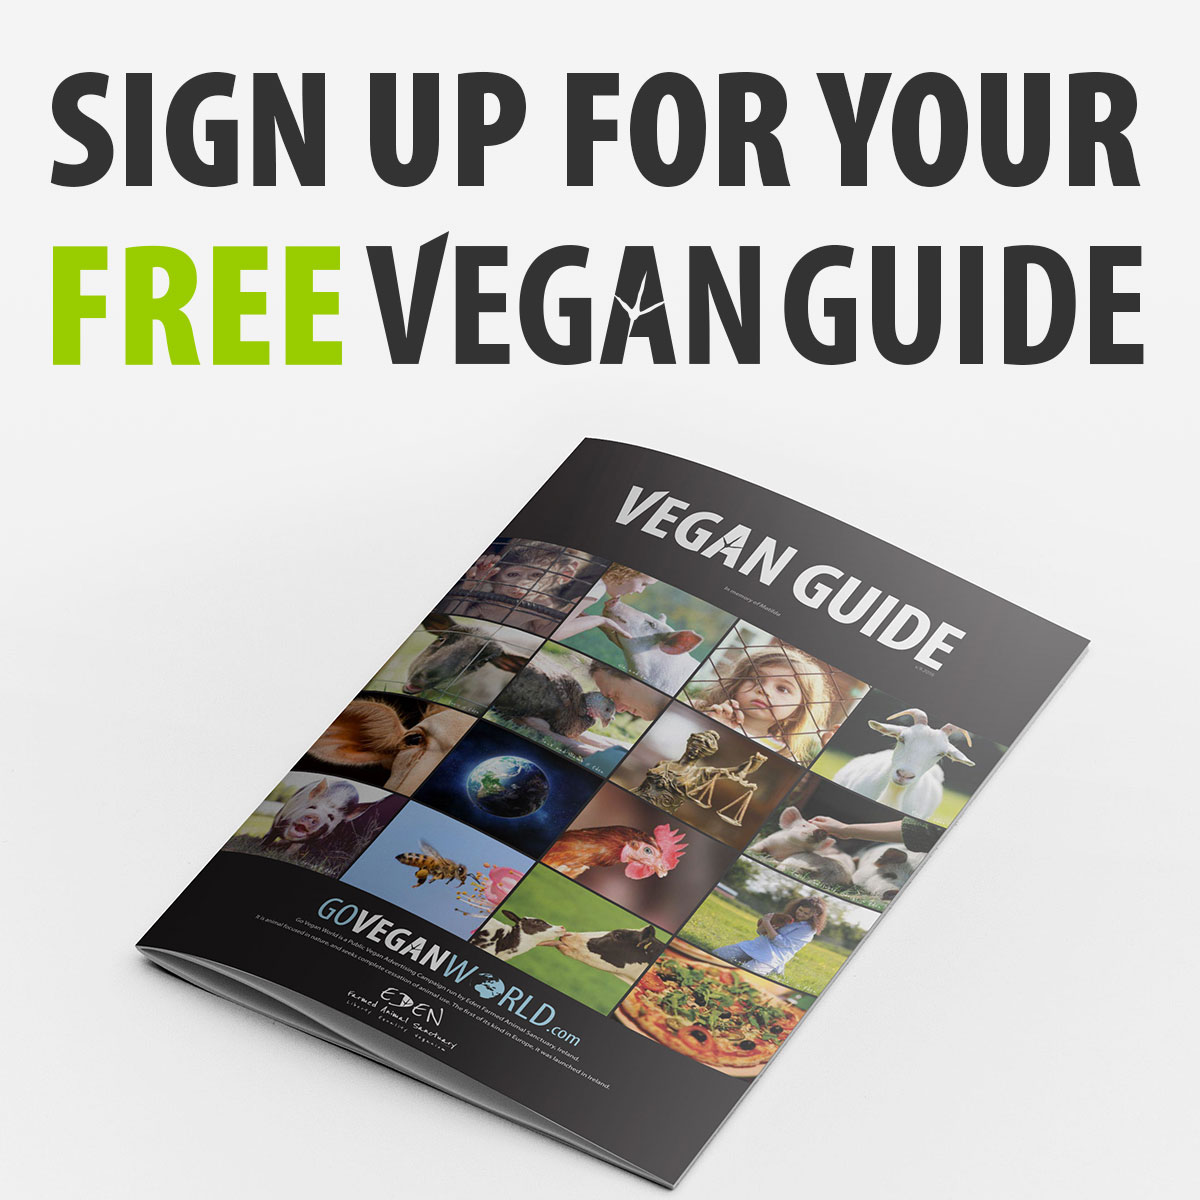 Sign Up for Your FREE Vegan Guide